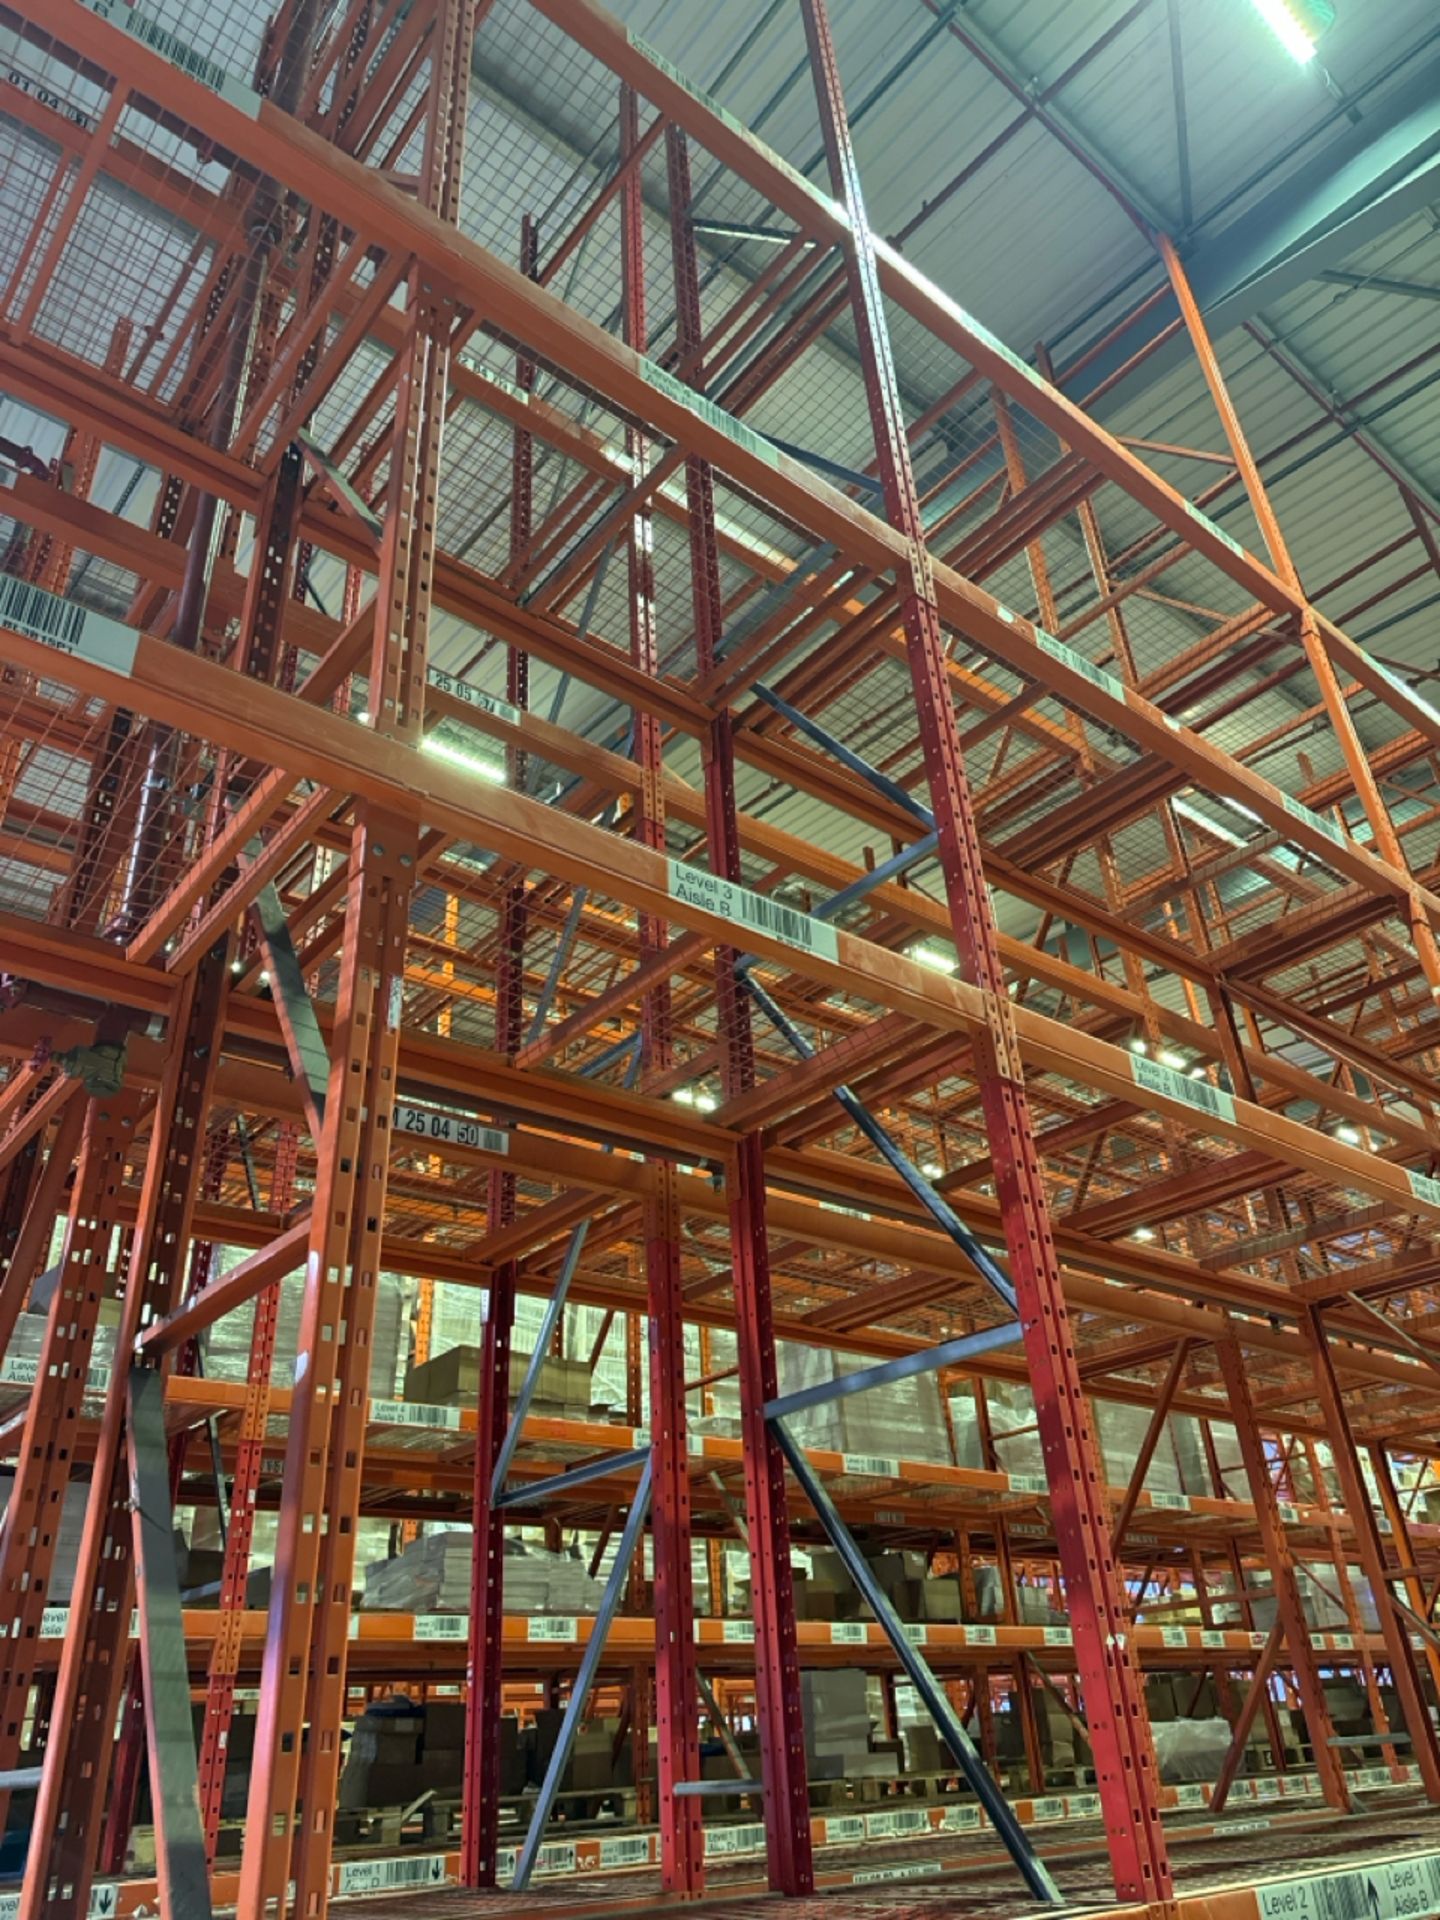 22 Bays Of Boltless Pallet Racking - Image 5 of 11